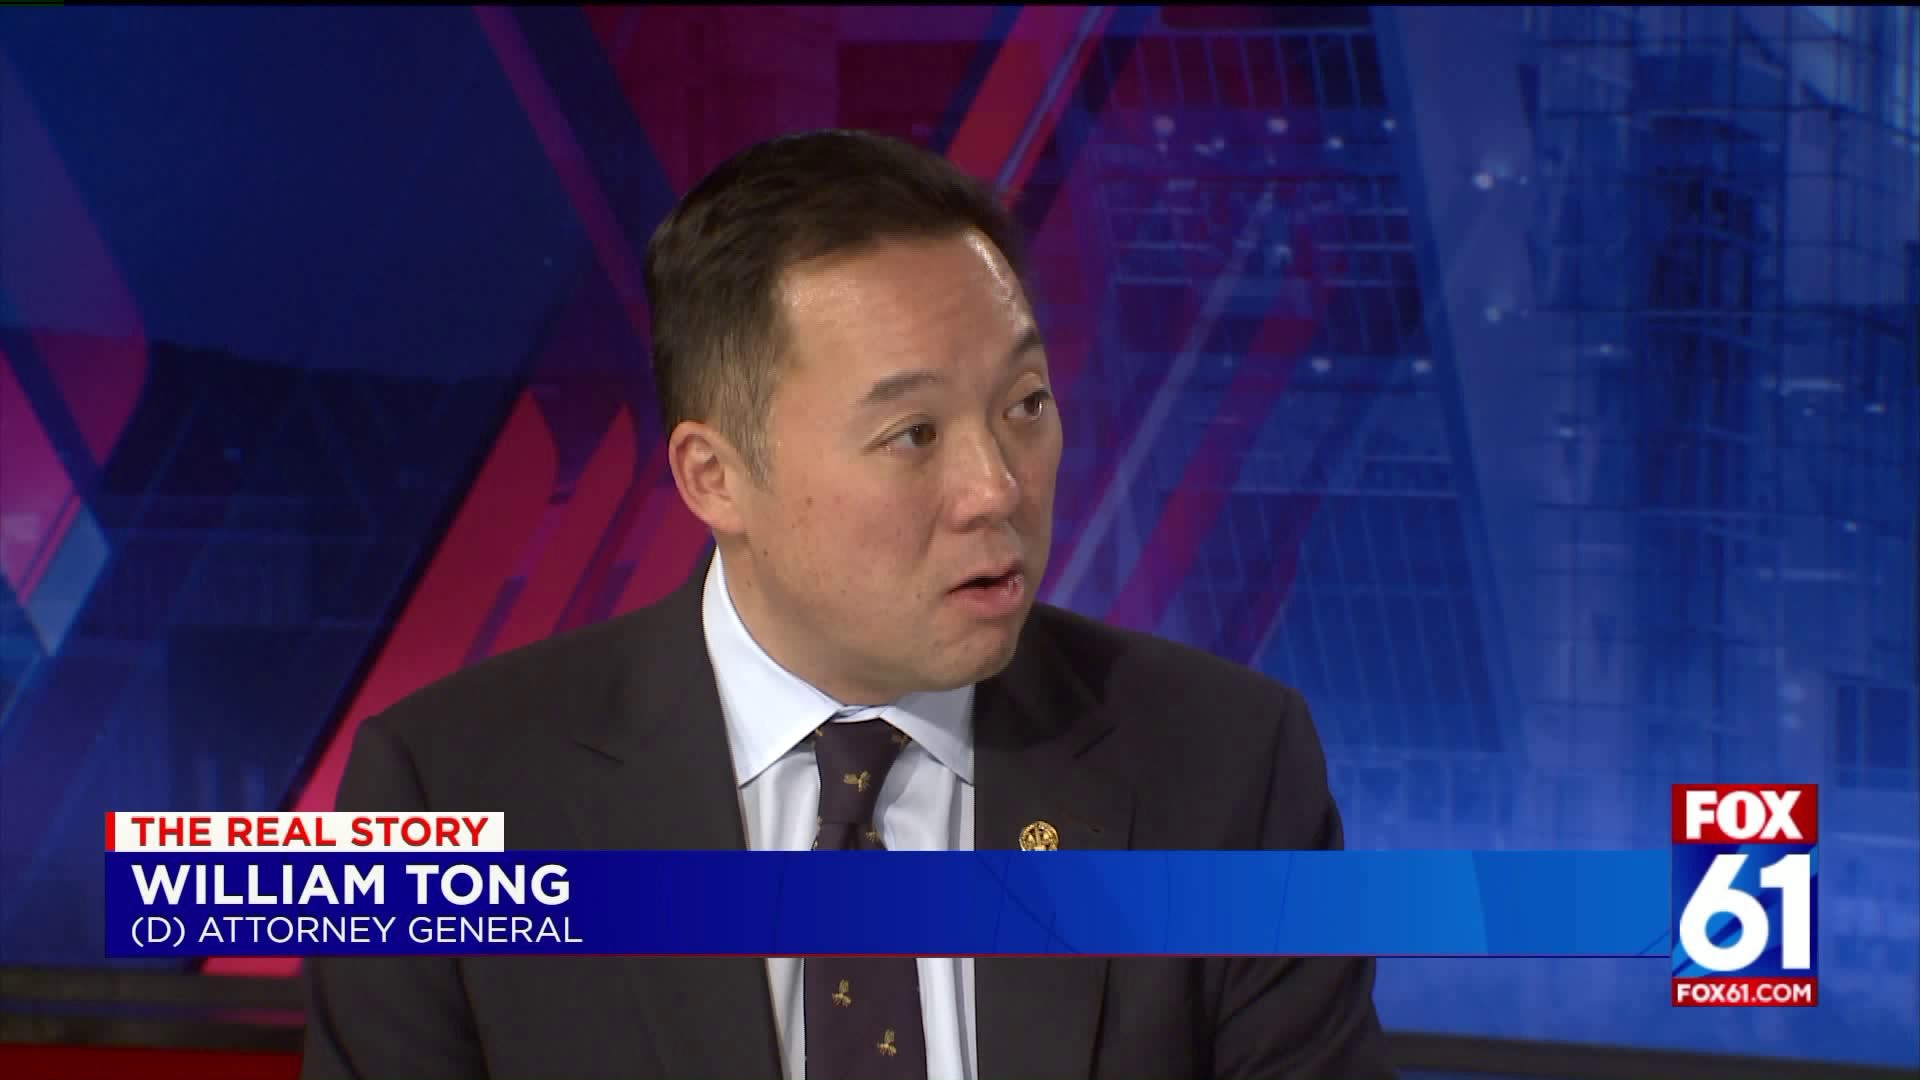 The Real Story: Attorney General William Tong on Sheff settlement